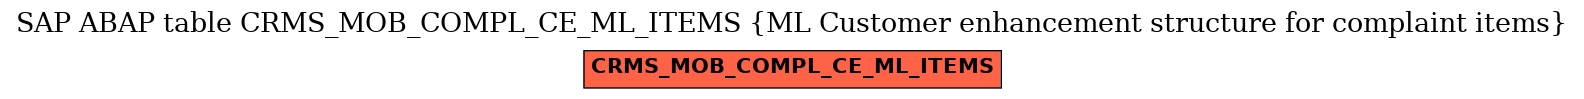 E-R Diagram for table CRMS_MOB_COMPL_CE_ML_ITEMS (ML Customer enhancement structure for complaint items)